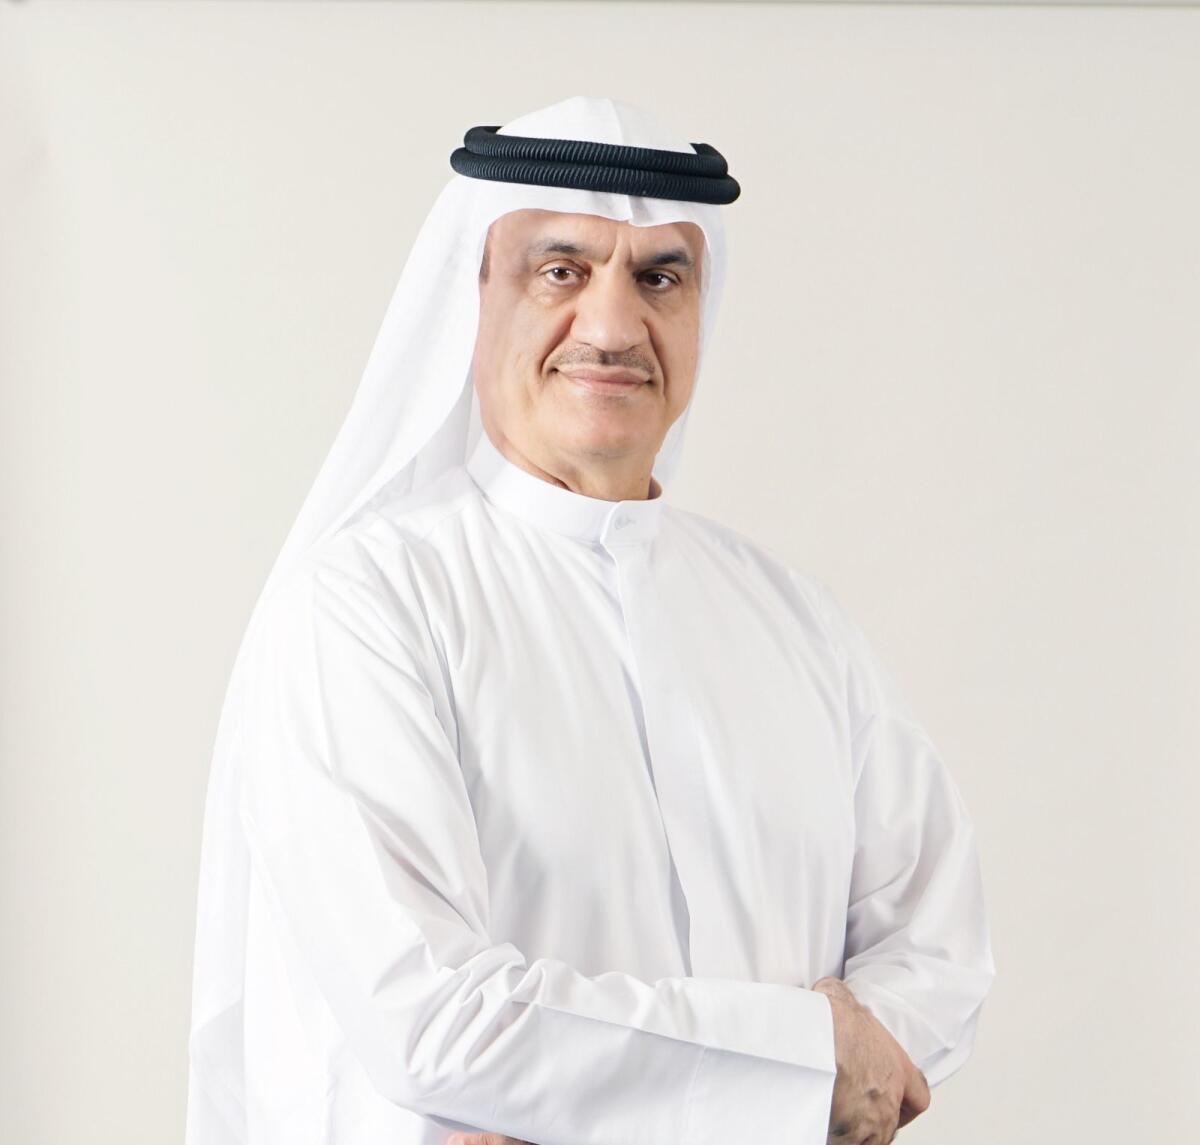 Ahmad Abdulkarim Mohammad Julfar possess vast expertise, having assumed leadership positions predominantly with the Etisalat Group in the UAE, culminating in his tenure as CEO, and with EITC (du), where he currently serves as managing director.